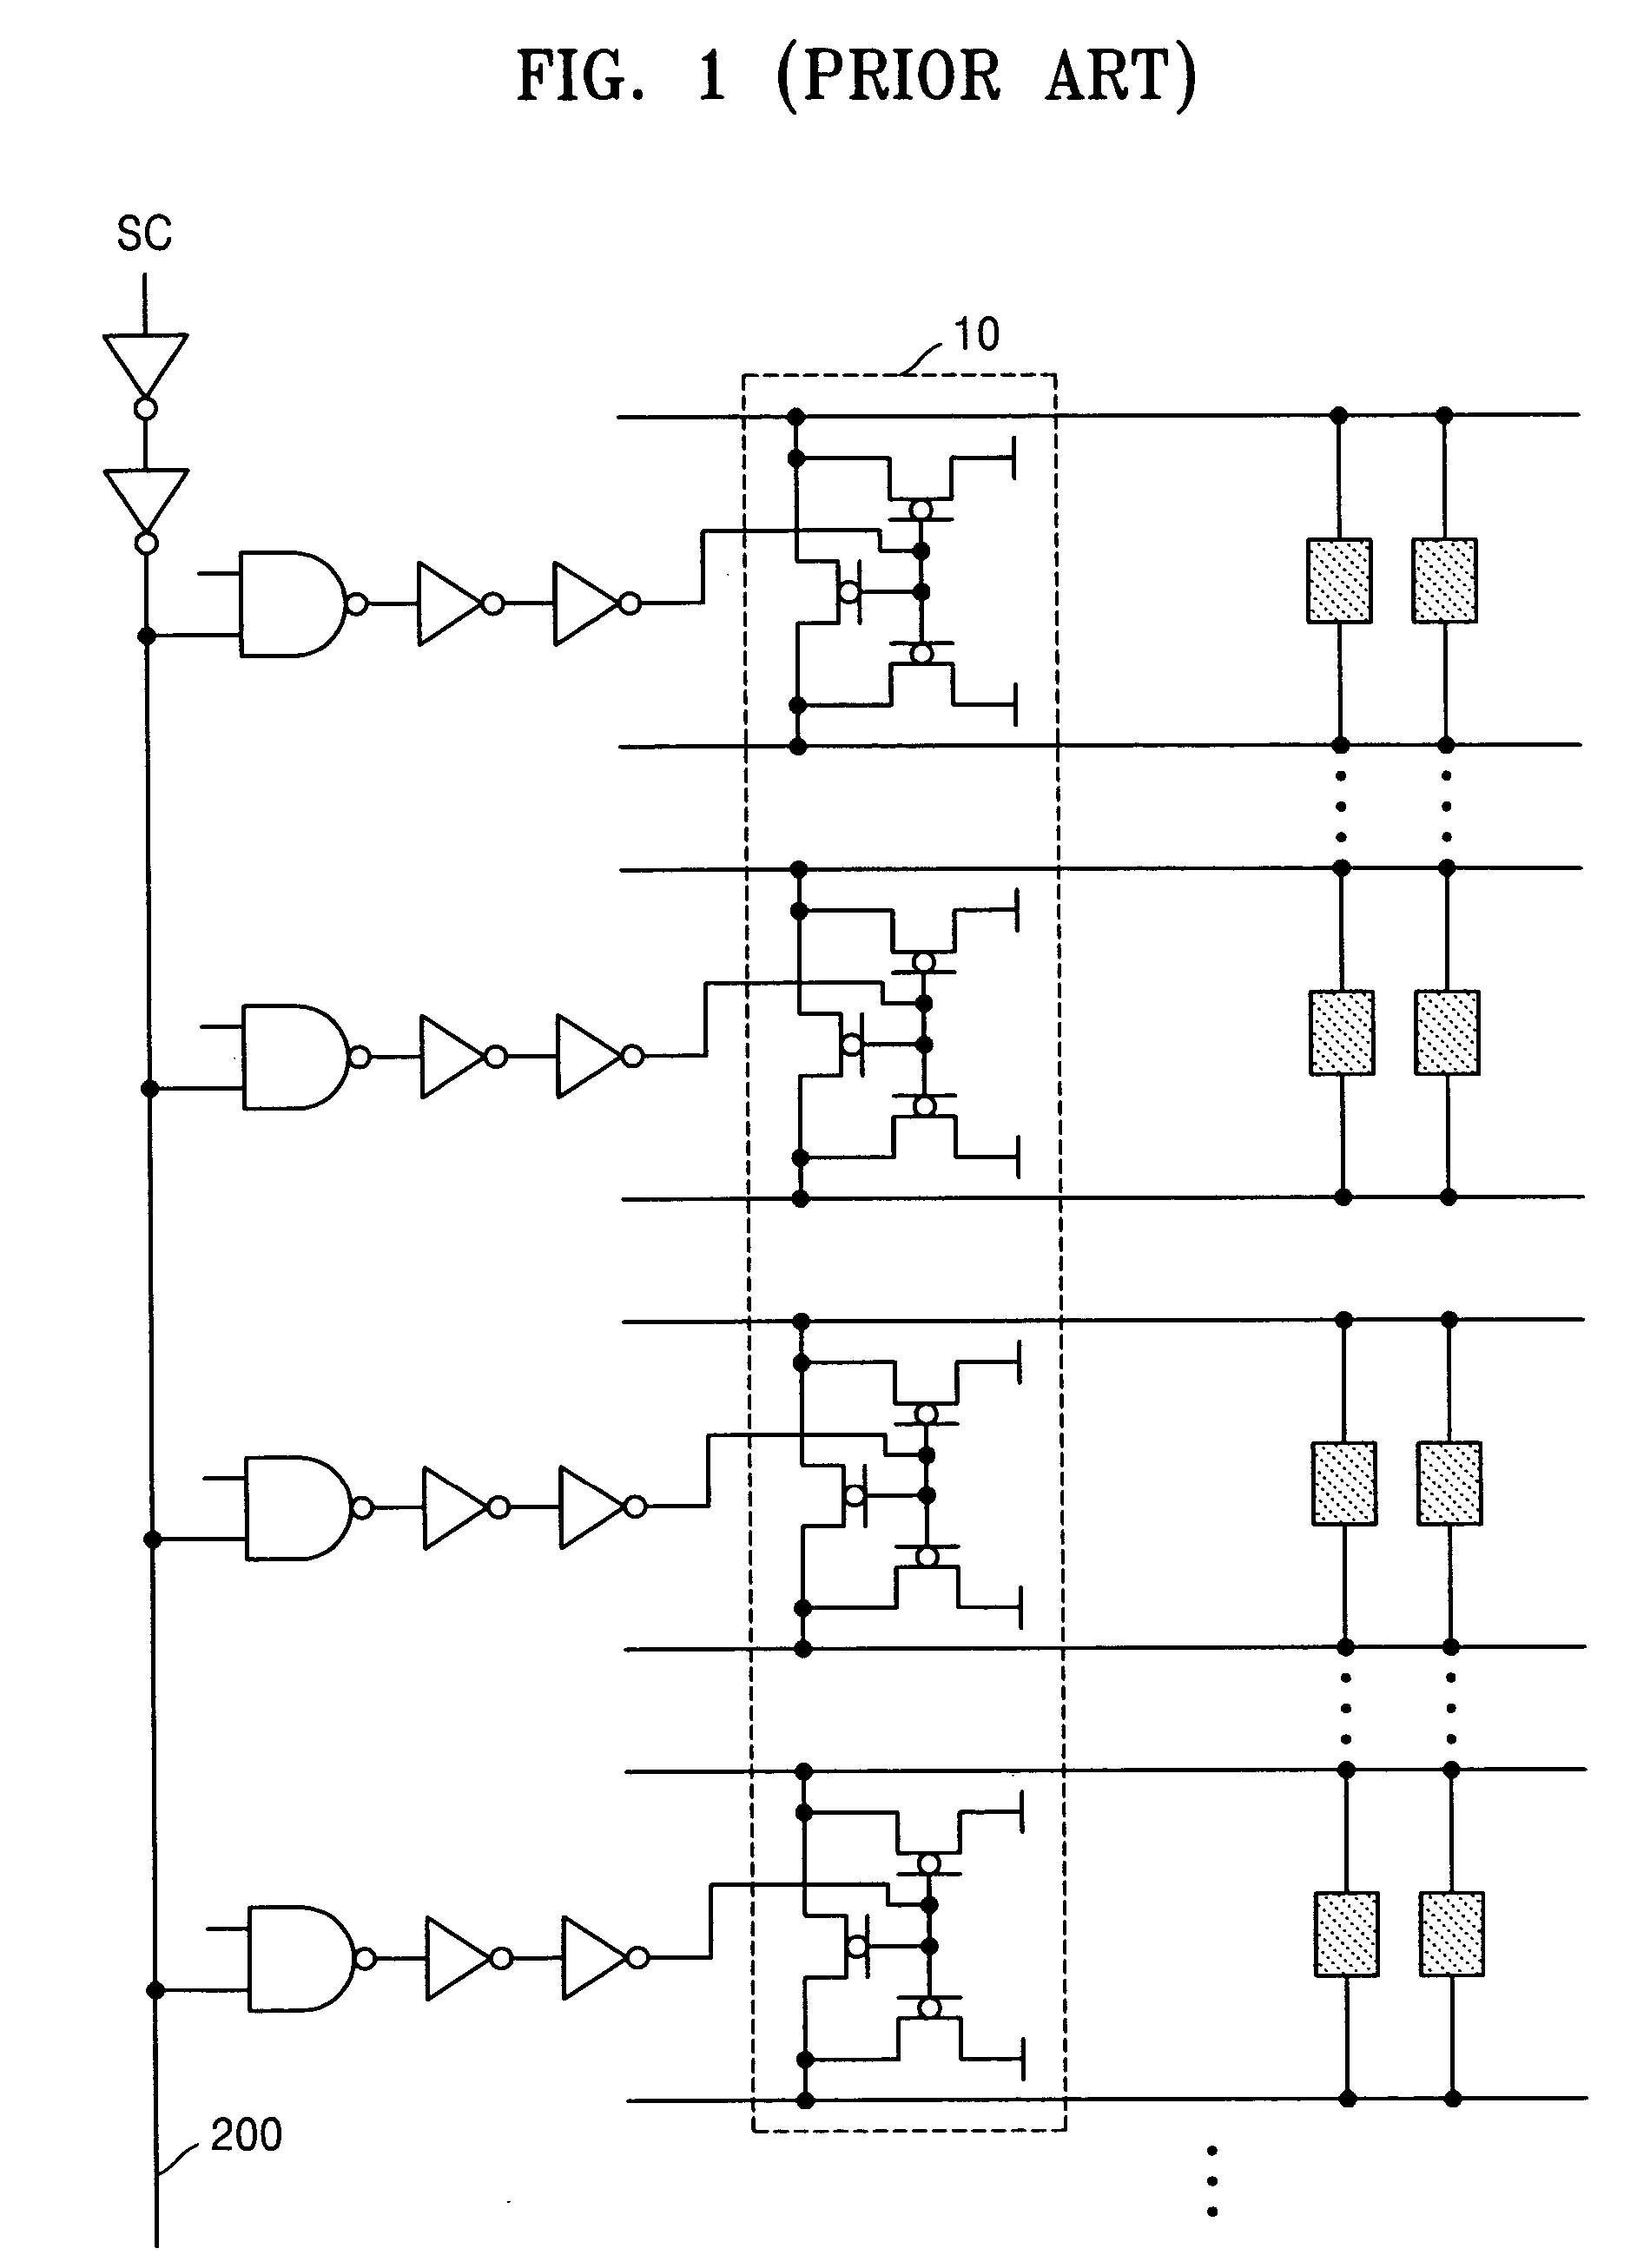 Cascade wake-up circuit preventing power noise in memory device